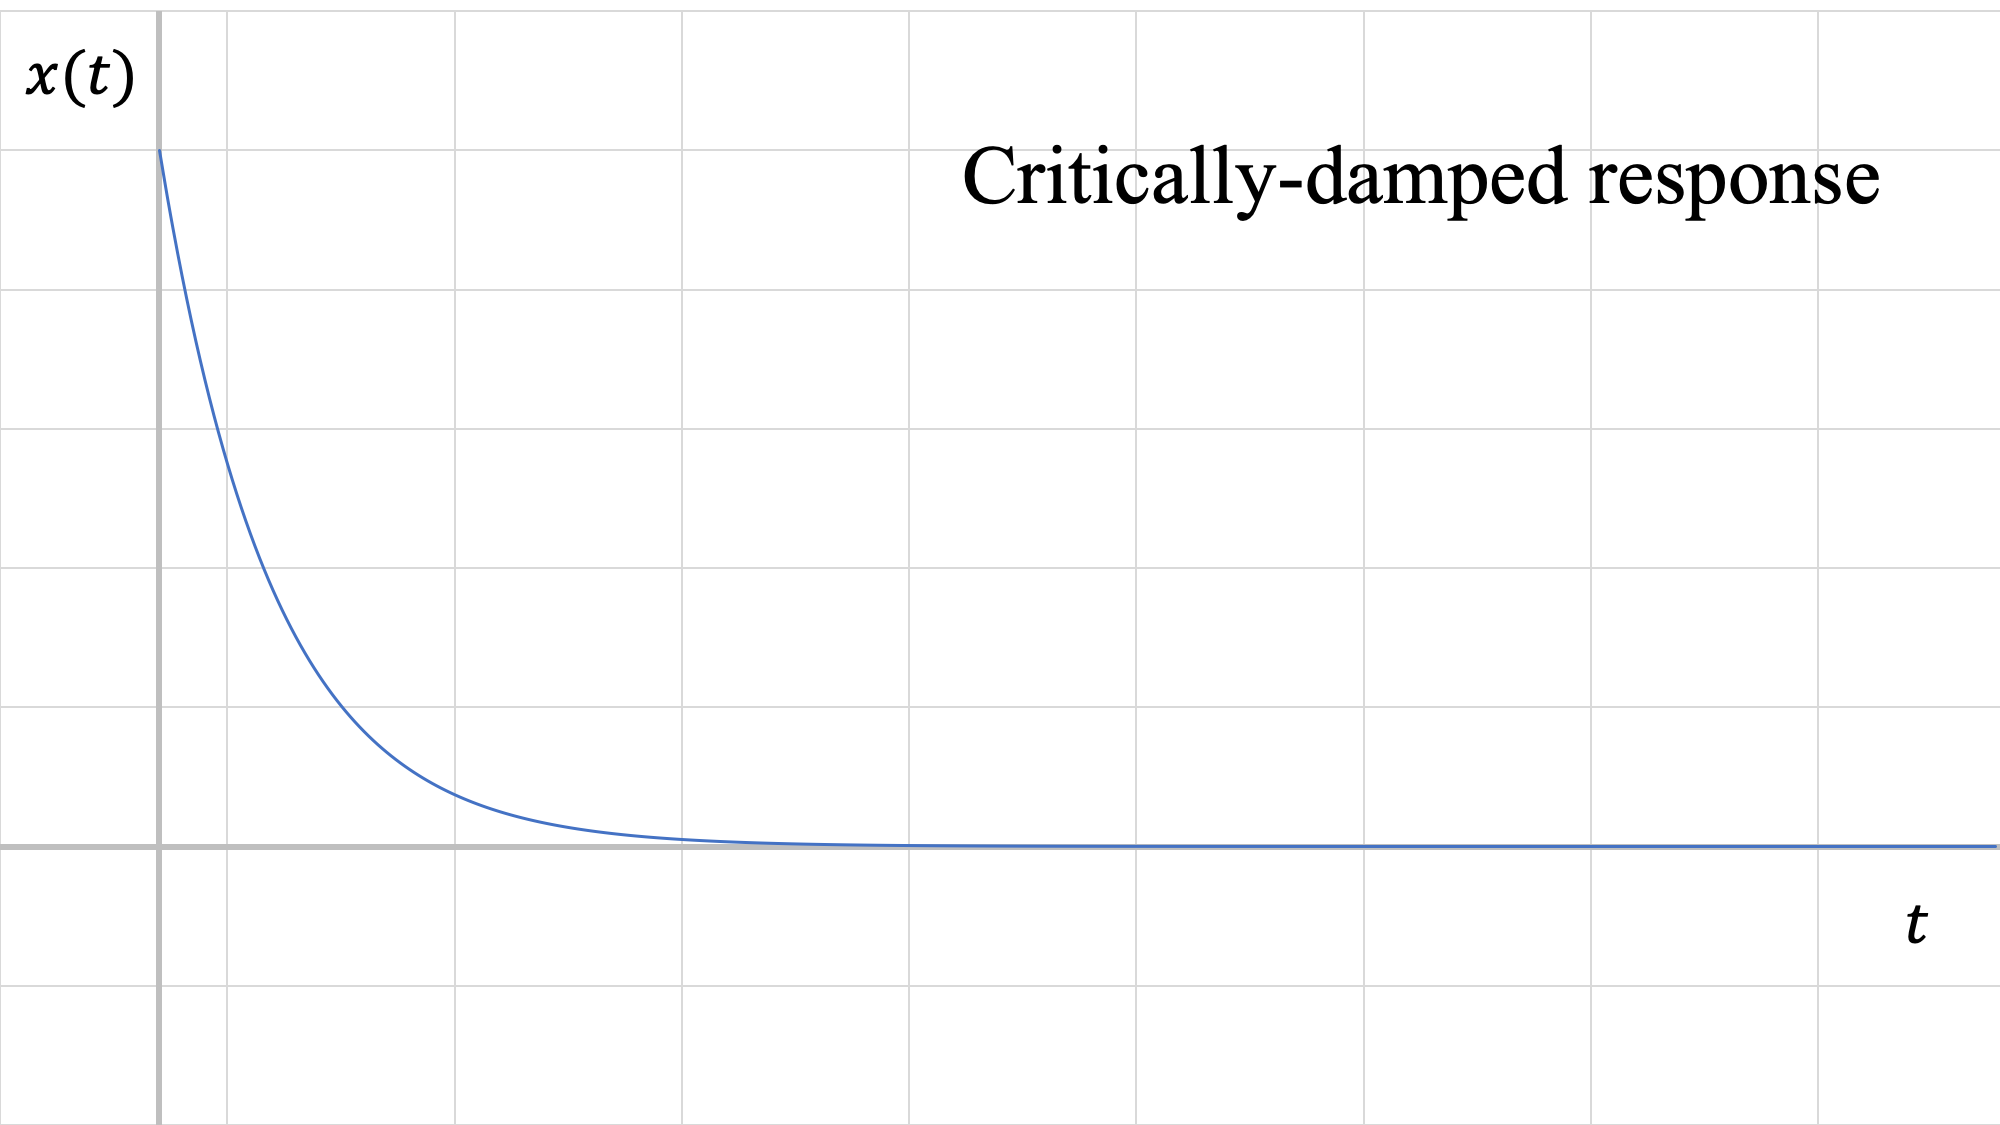 Critically-damped system response